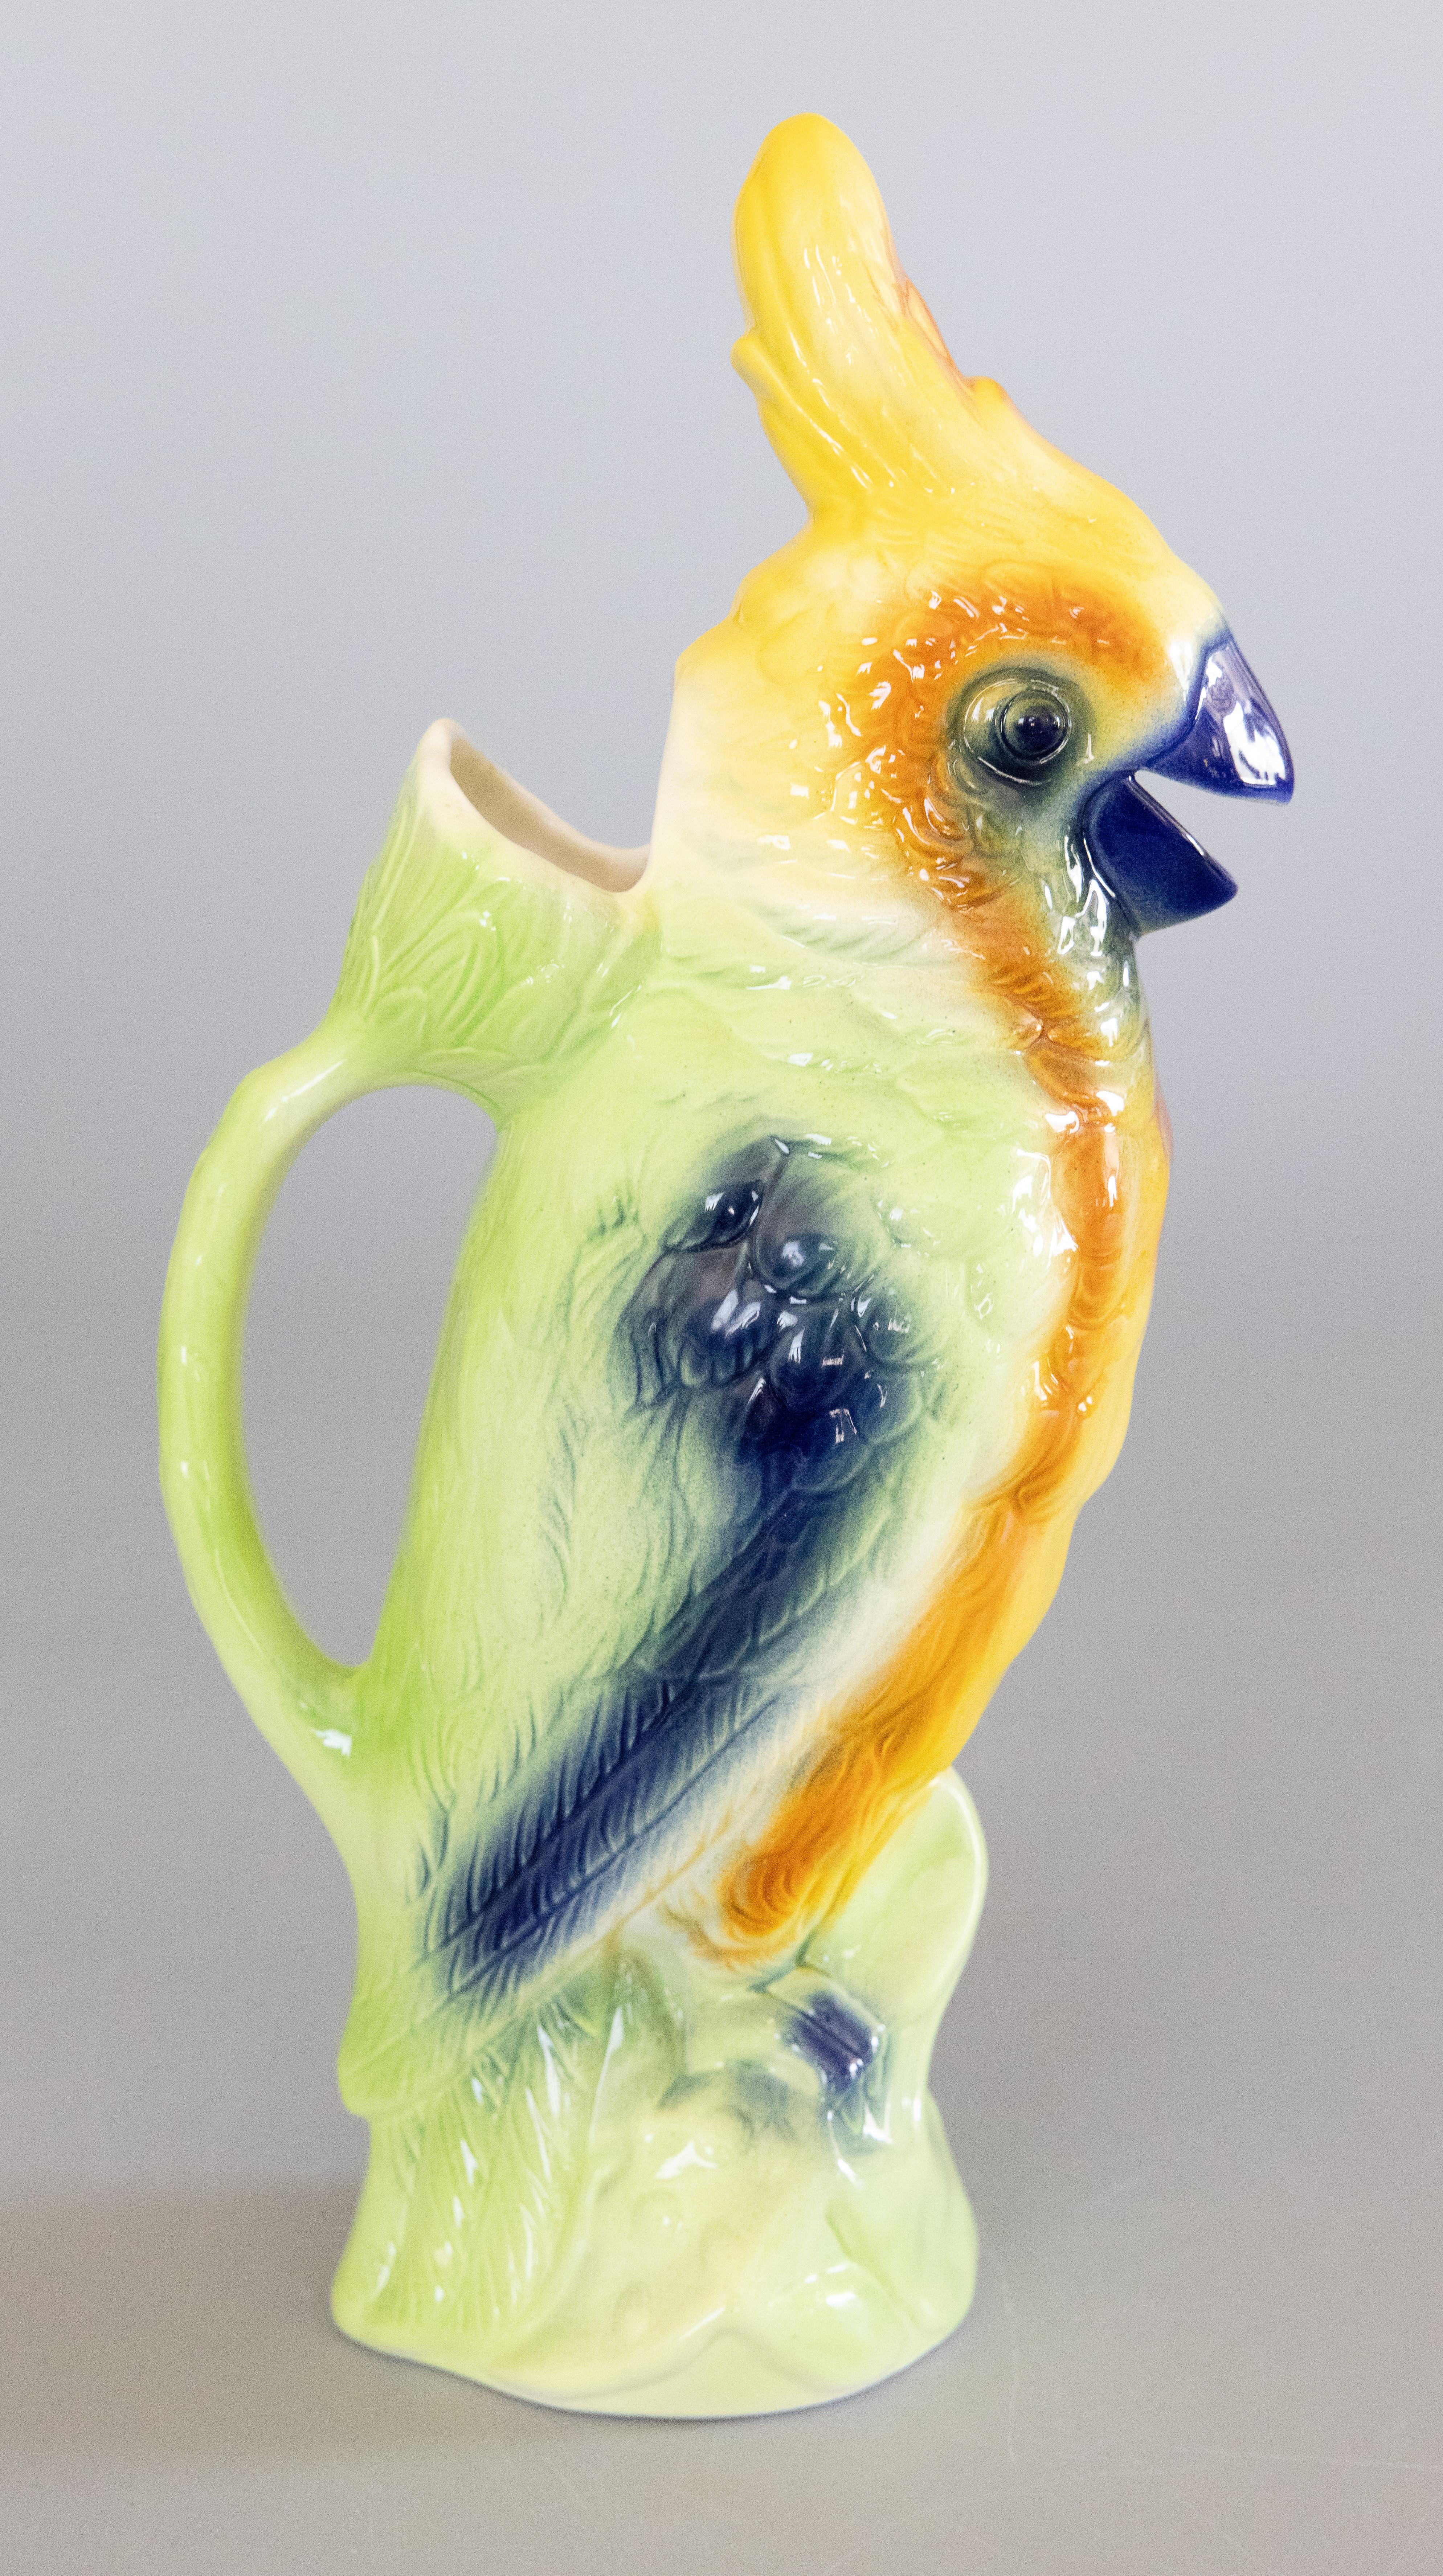 A gorgeous vintage French majolica parrot absinthe pitcher decanter or figural jug hand painted with beautiful vibrant colors, circa 1940-1950. This pitcher was made at the St. Clement faience factory in France and is signed on the